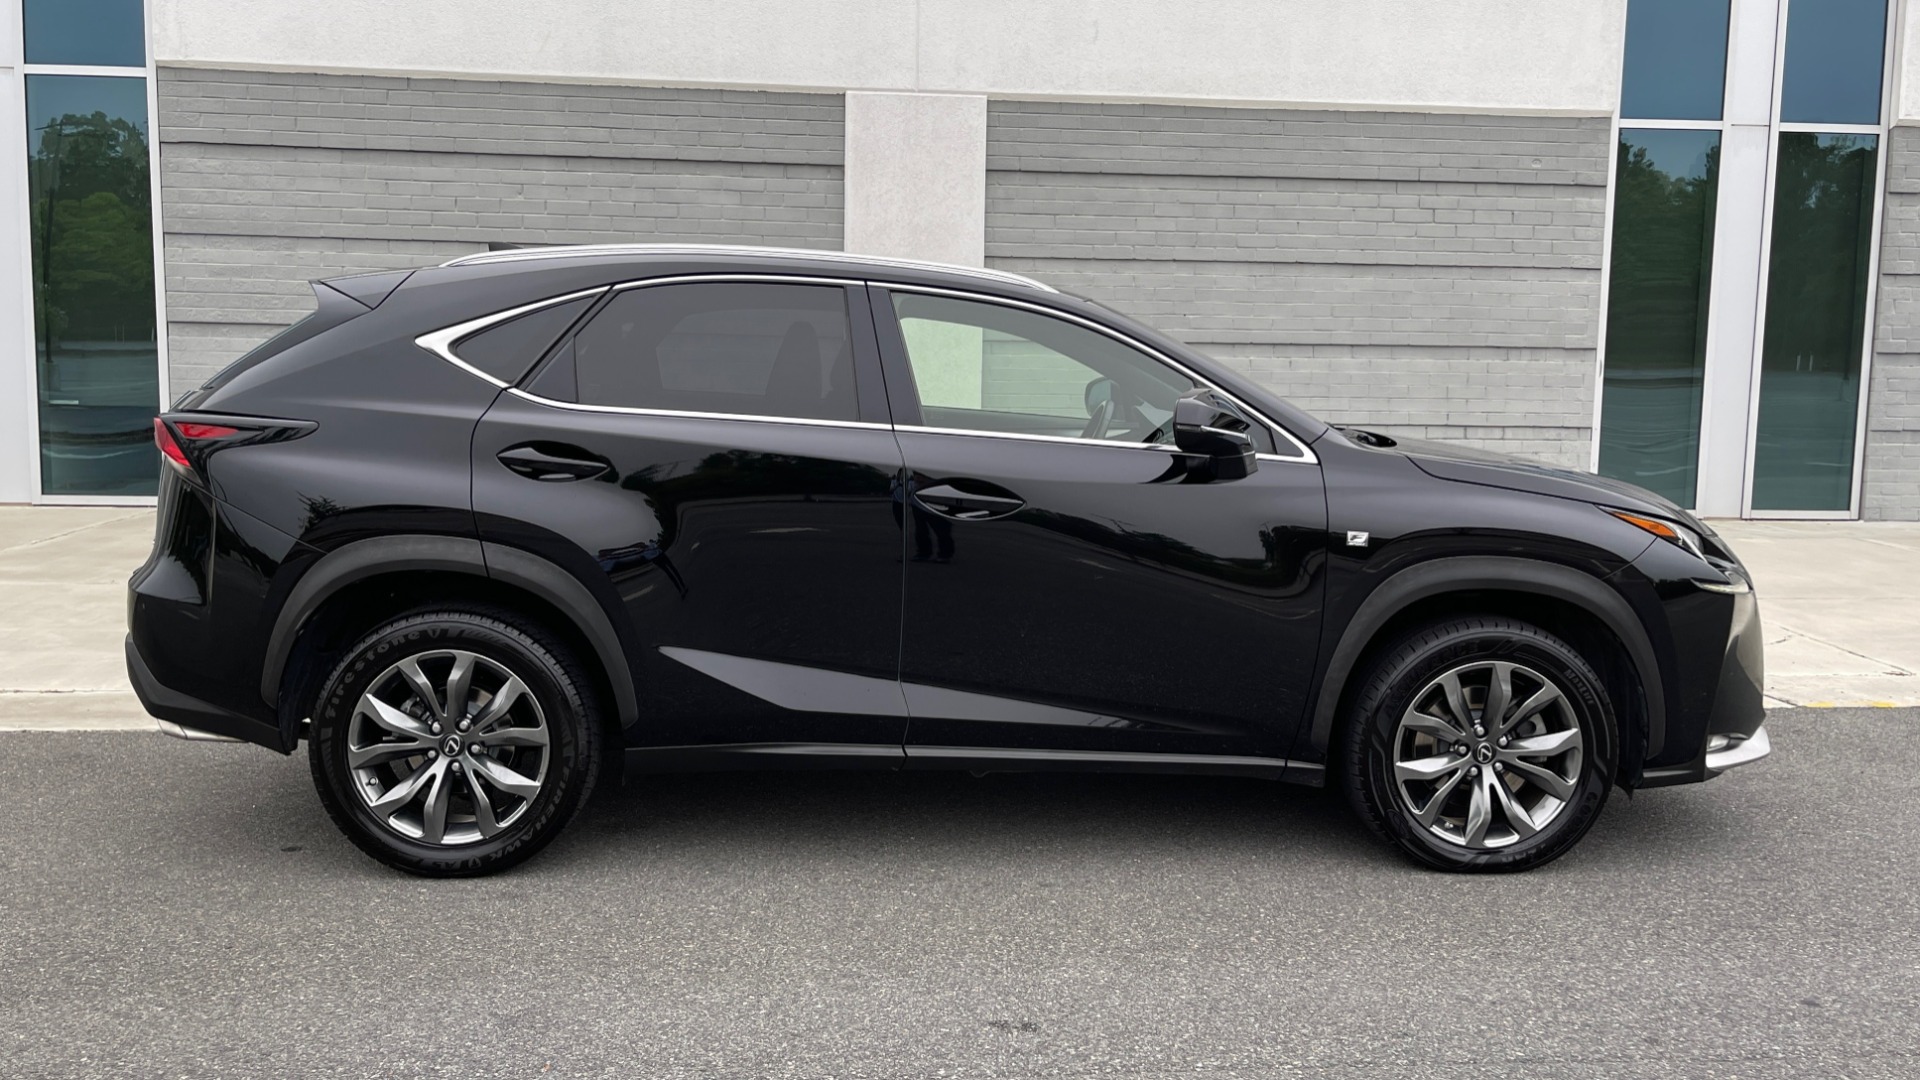 Used 2017 Lexus NX PREMIUM F-SPORT / 2.0L TURBO / BSM / PARK ASST / REARVIEW for sale Sold at Formula Imports in Charlotte NC 28227 7